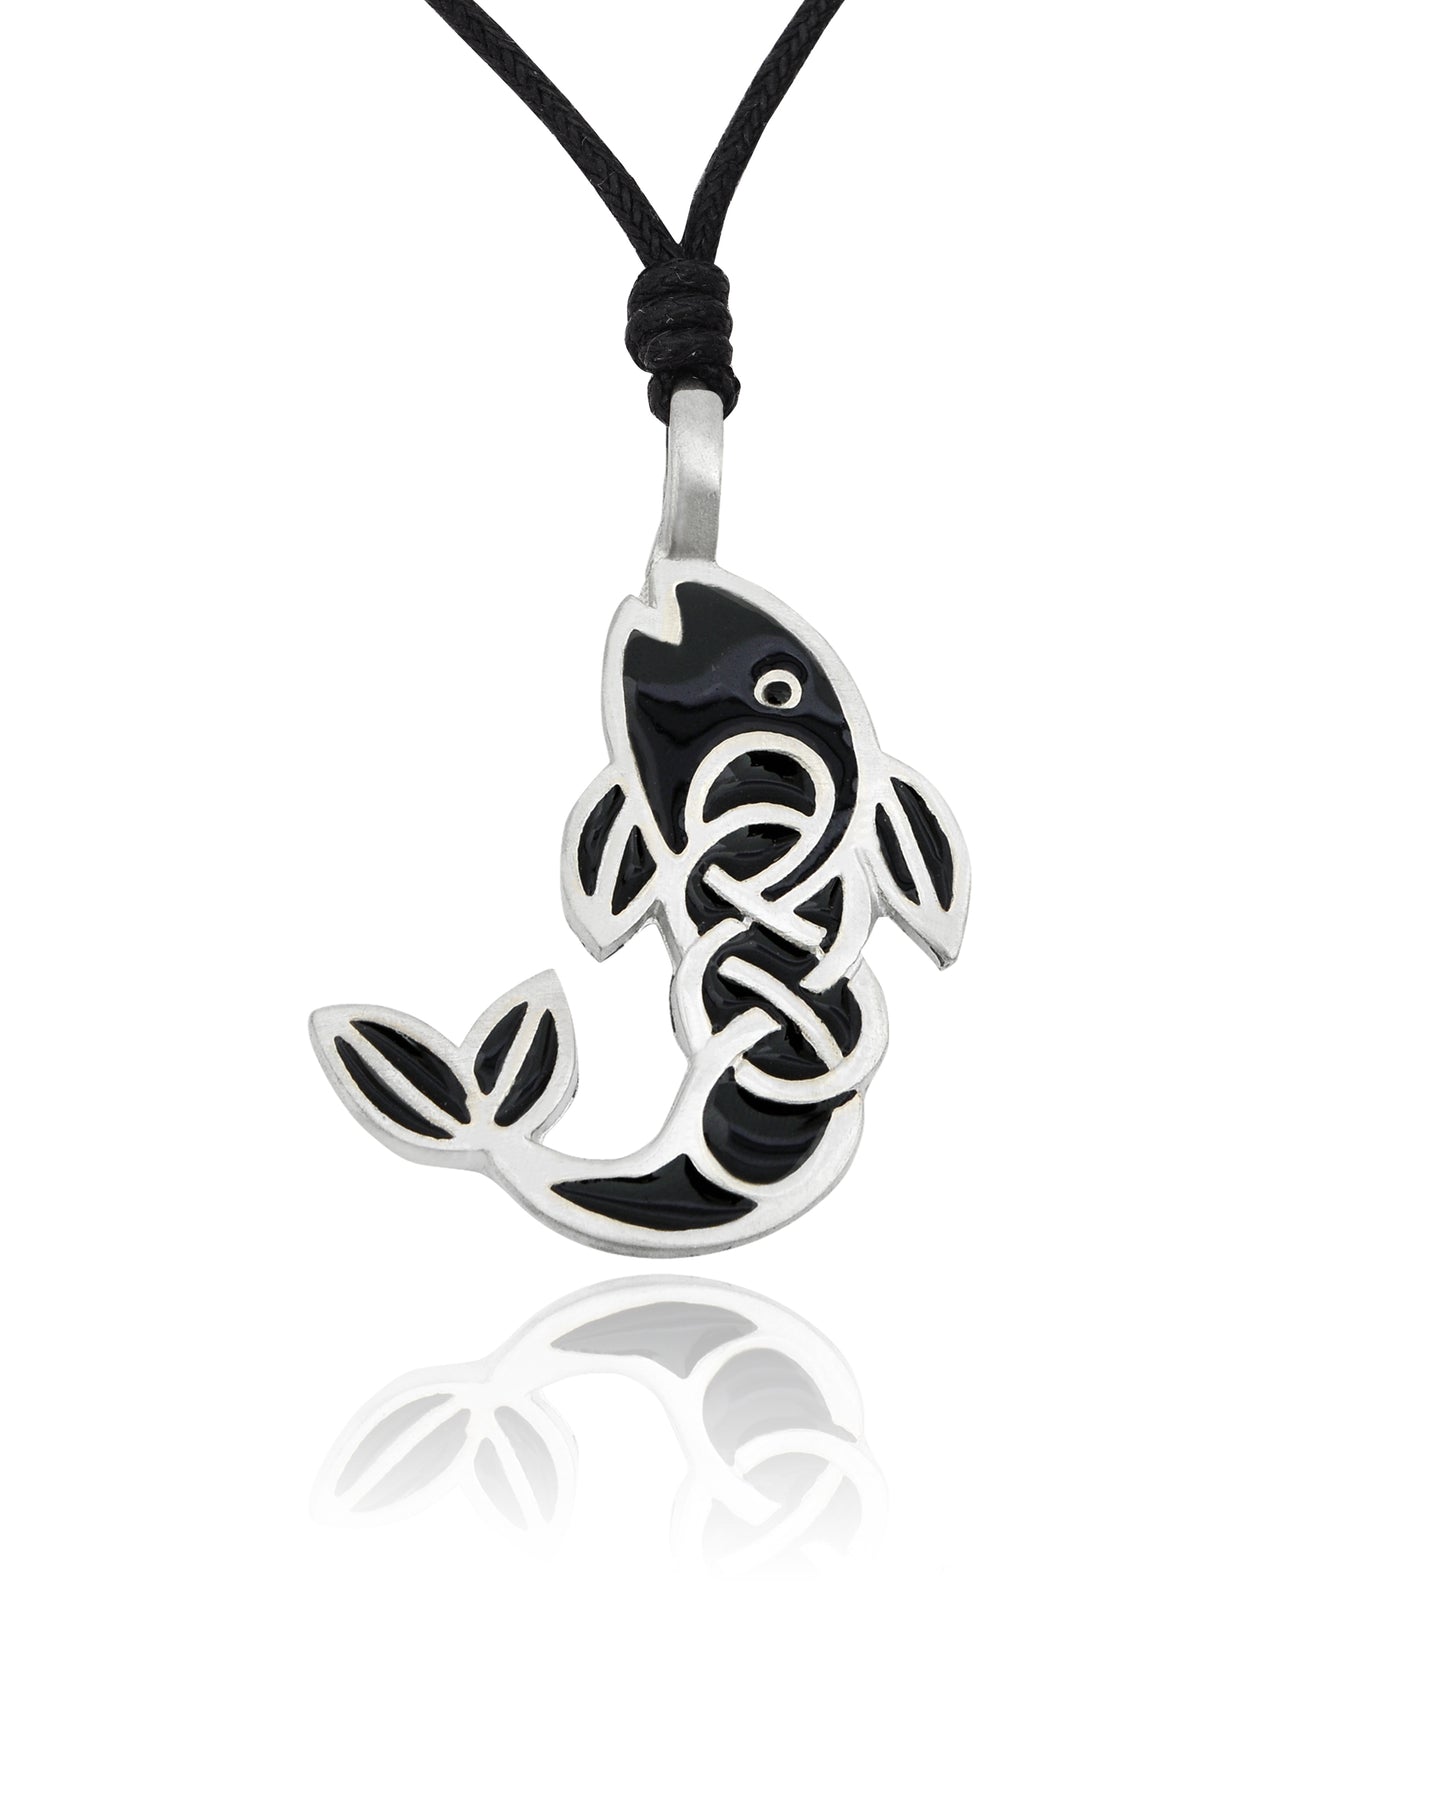 Celtic Fish Silver Pewter Charm Necklace Pendant Jewelry